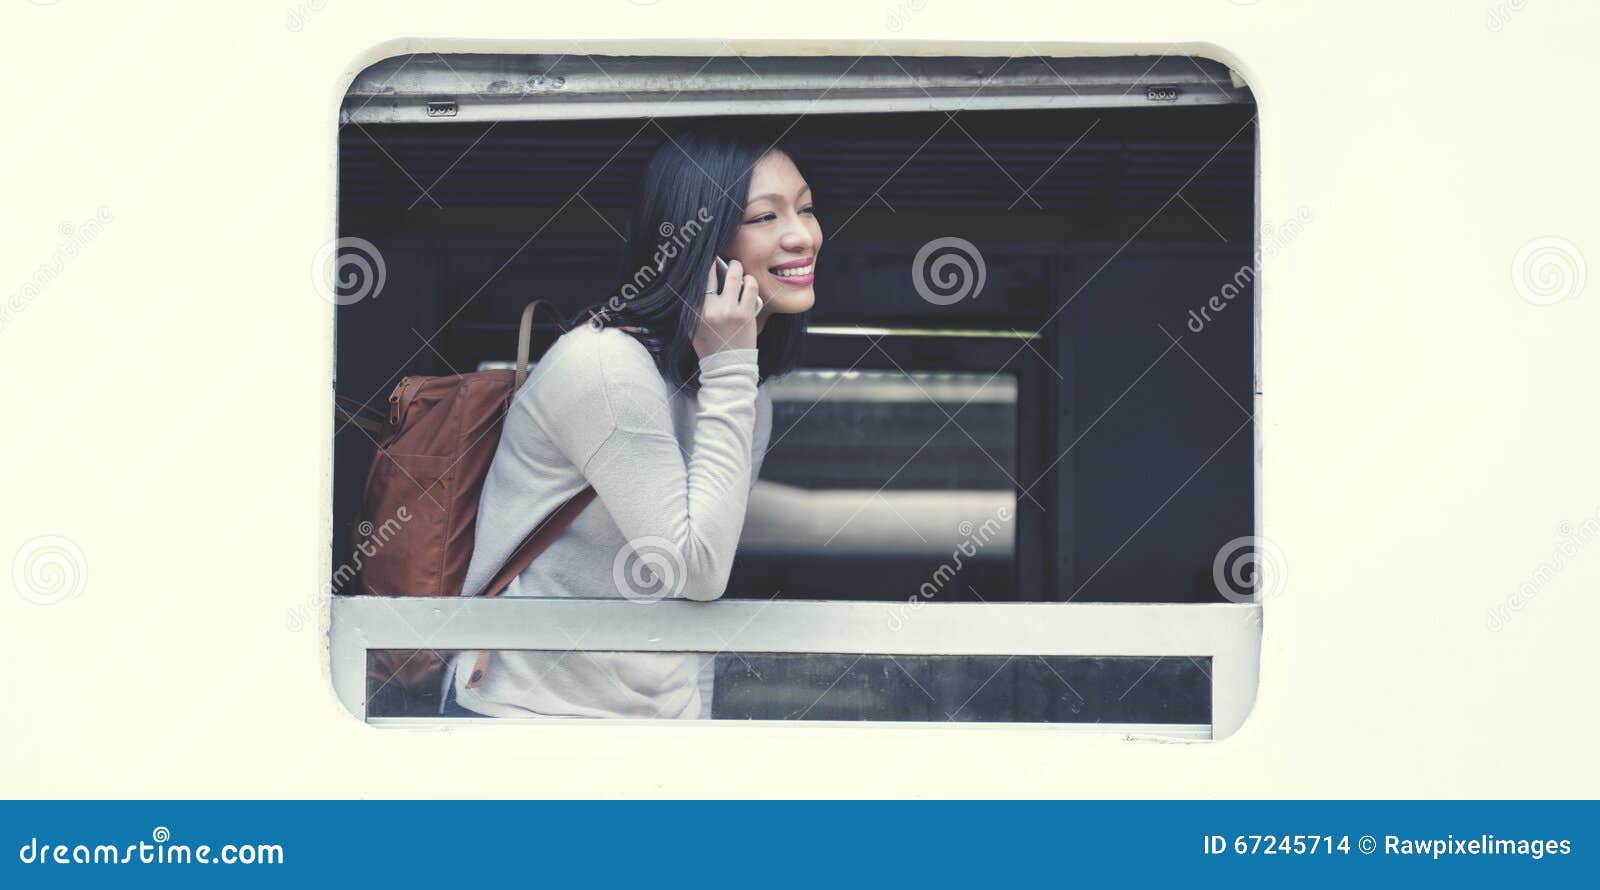 asian lady traveling commute train concept